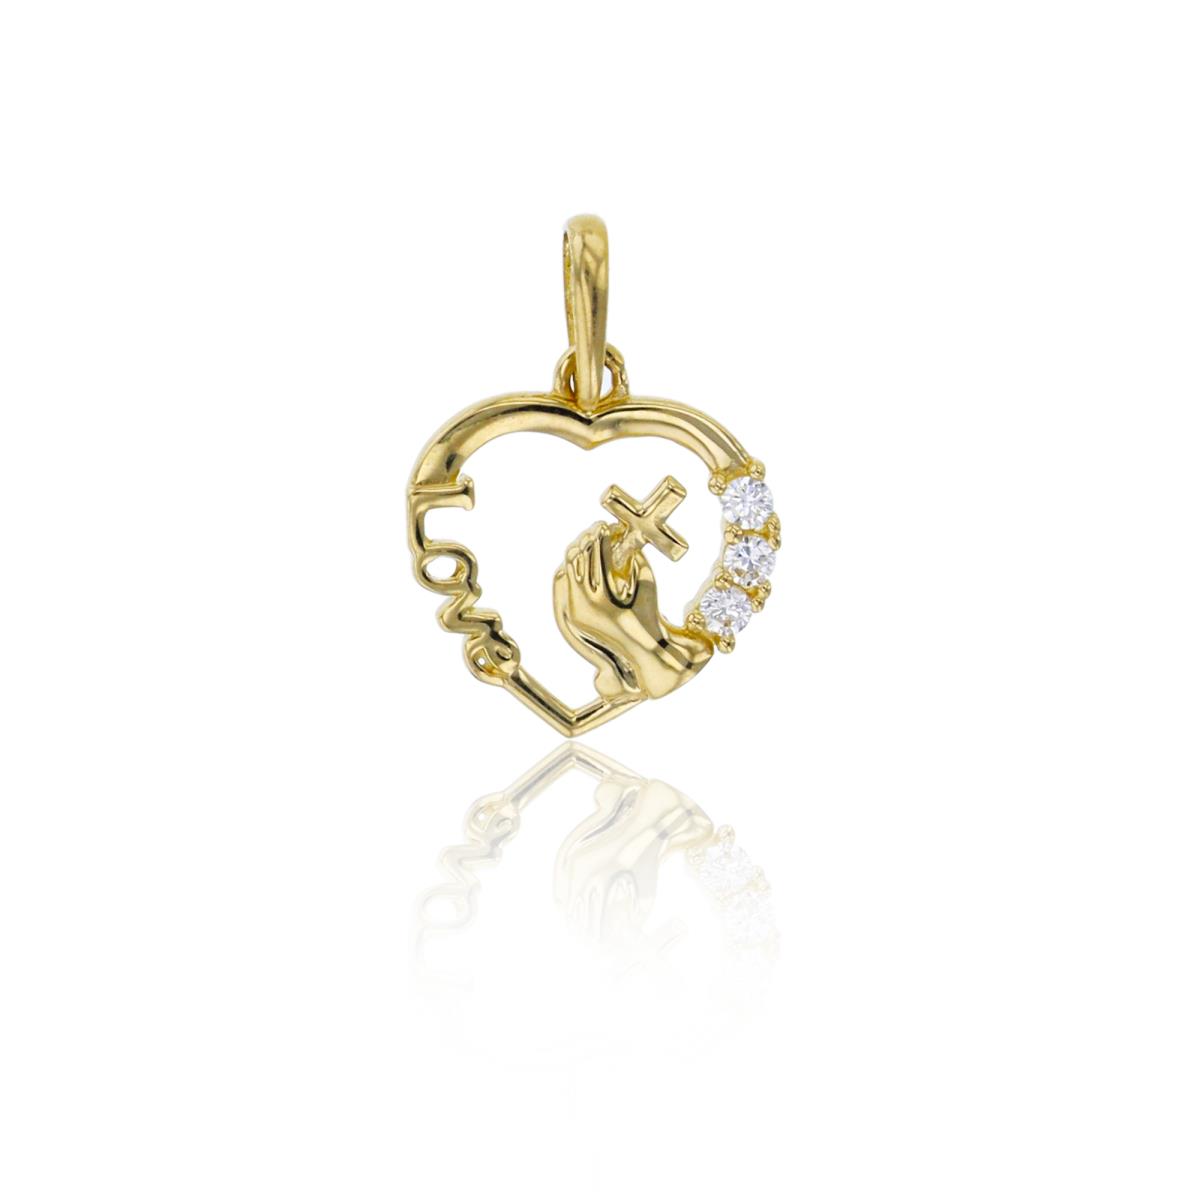 10K Yellow Gold 15x11mm Polished Open Heart with "Love" & Praying Hands Pendant